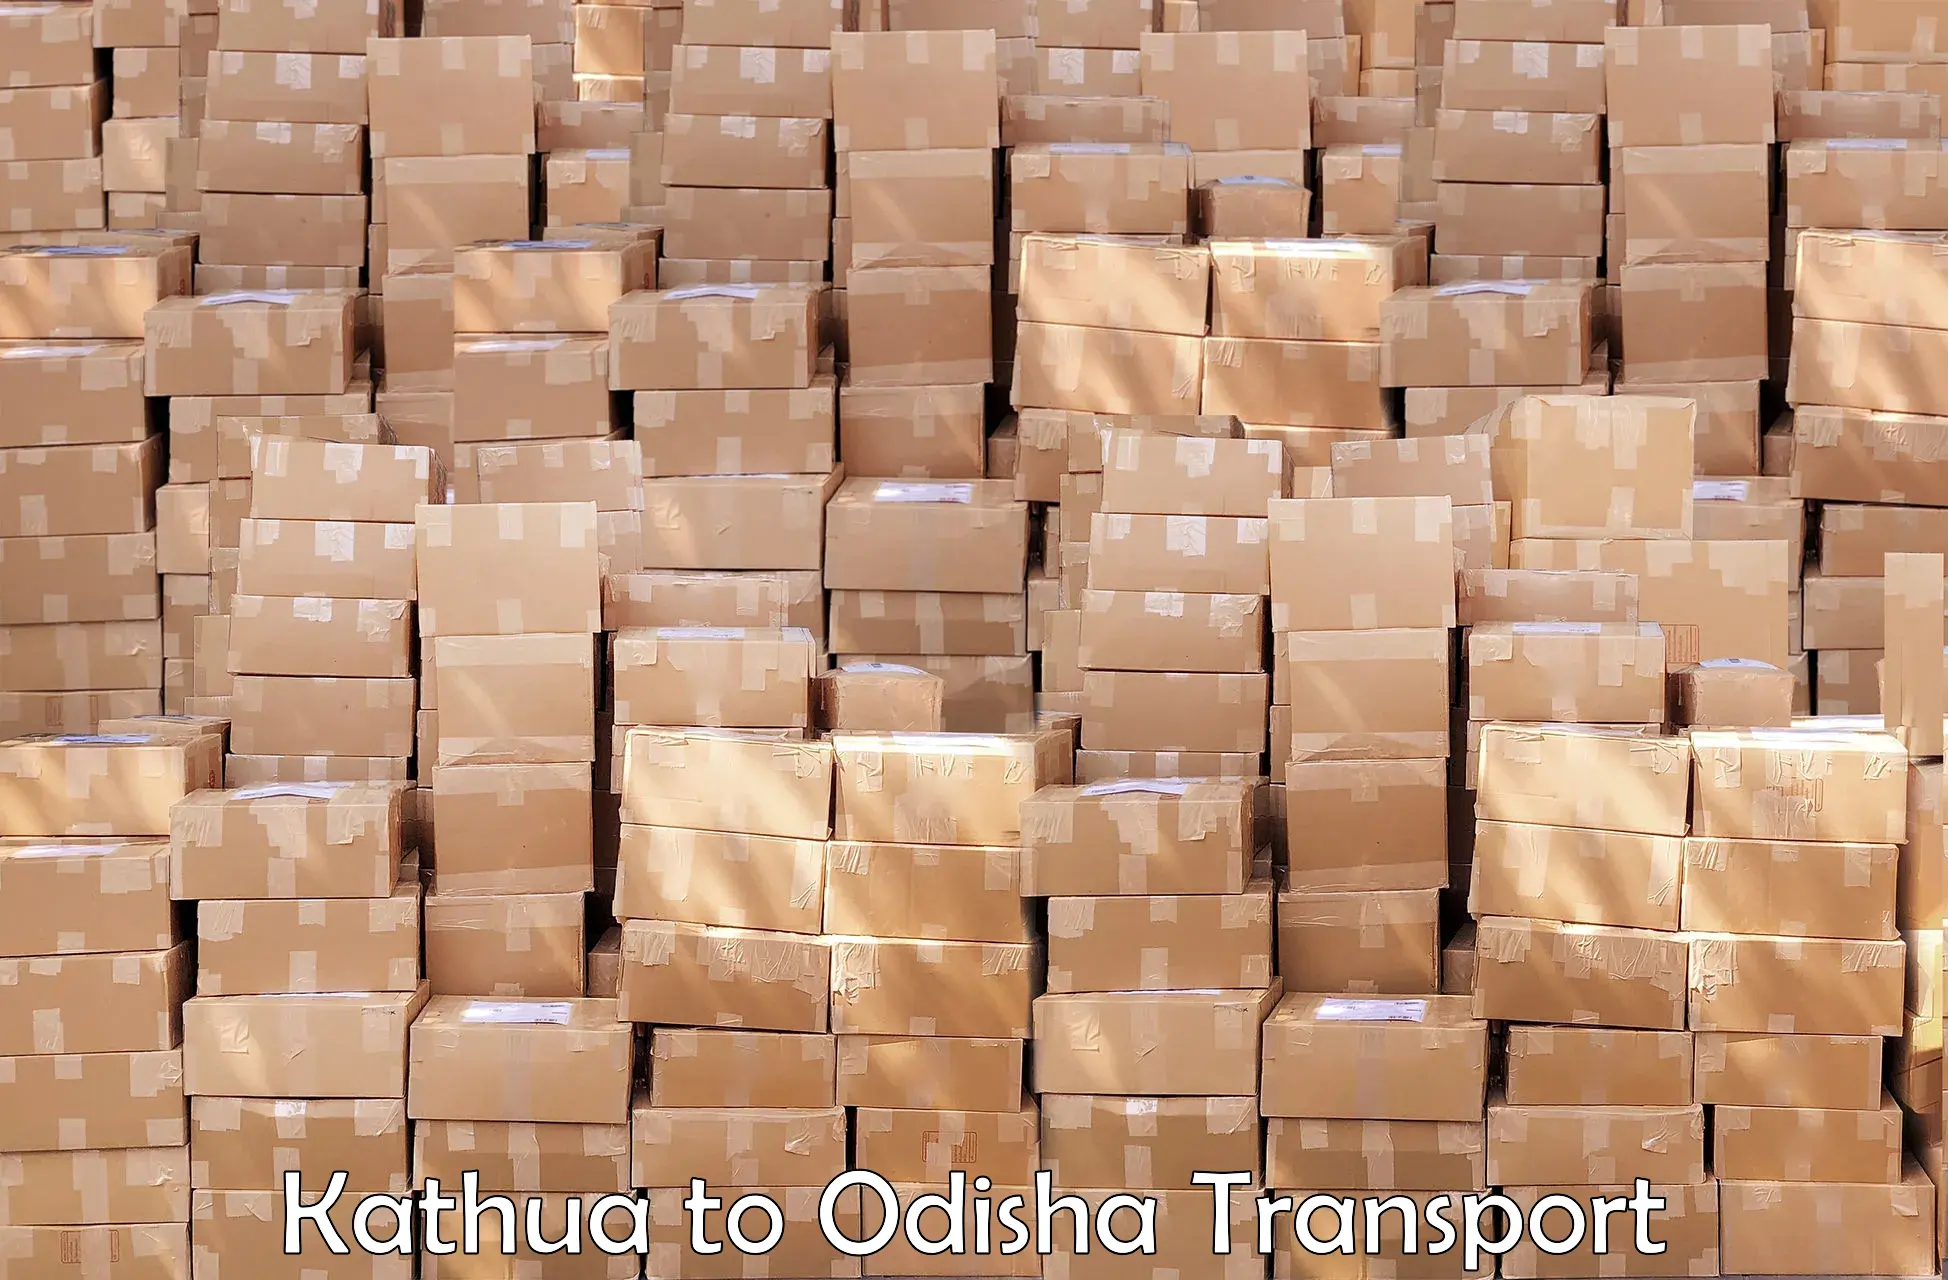 Daily parcel service transport in Kathua to Bhadrak